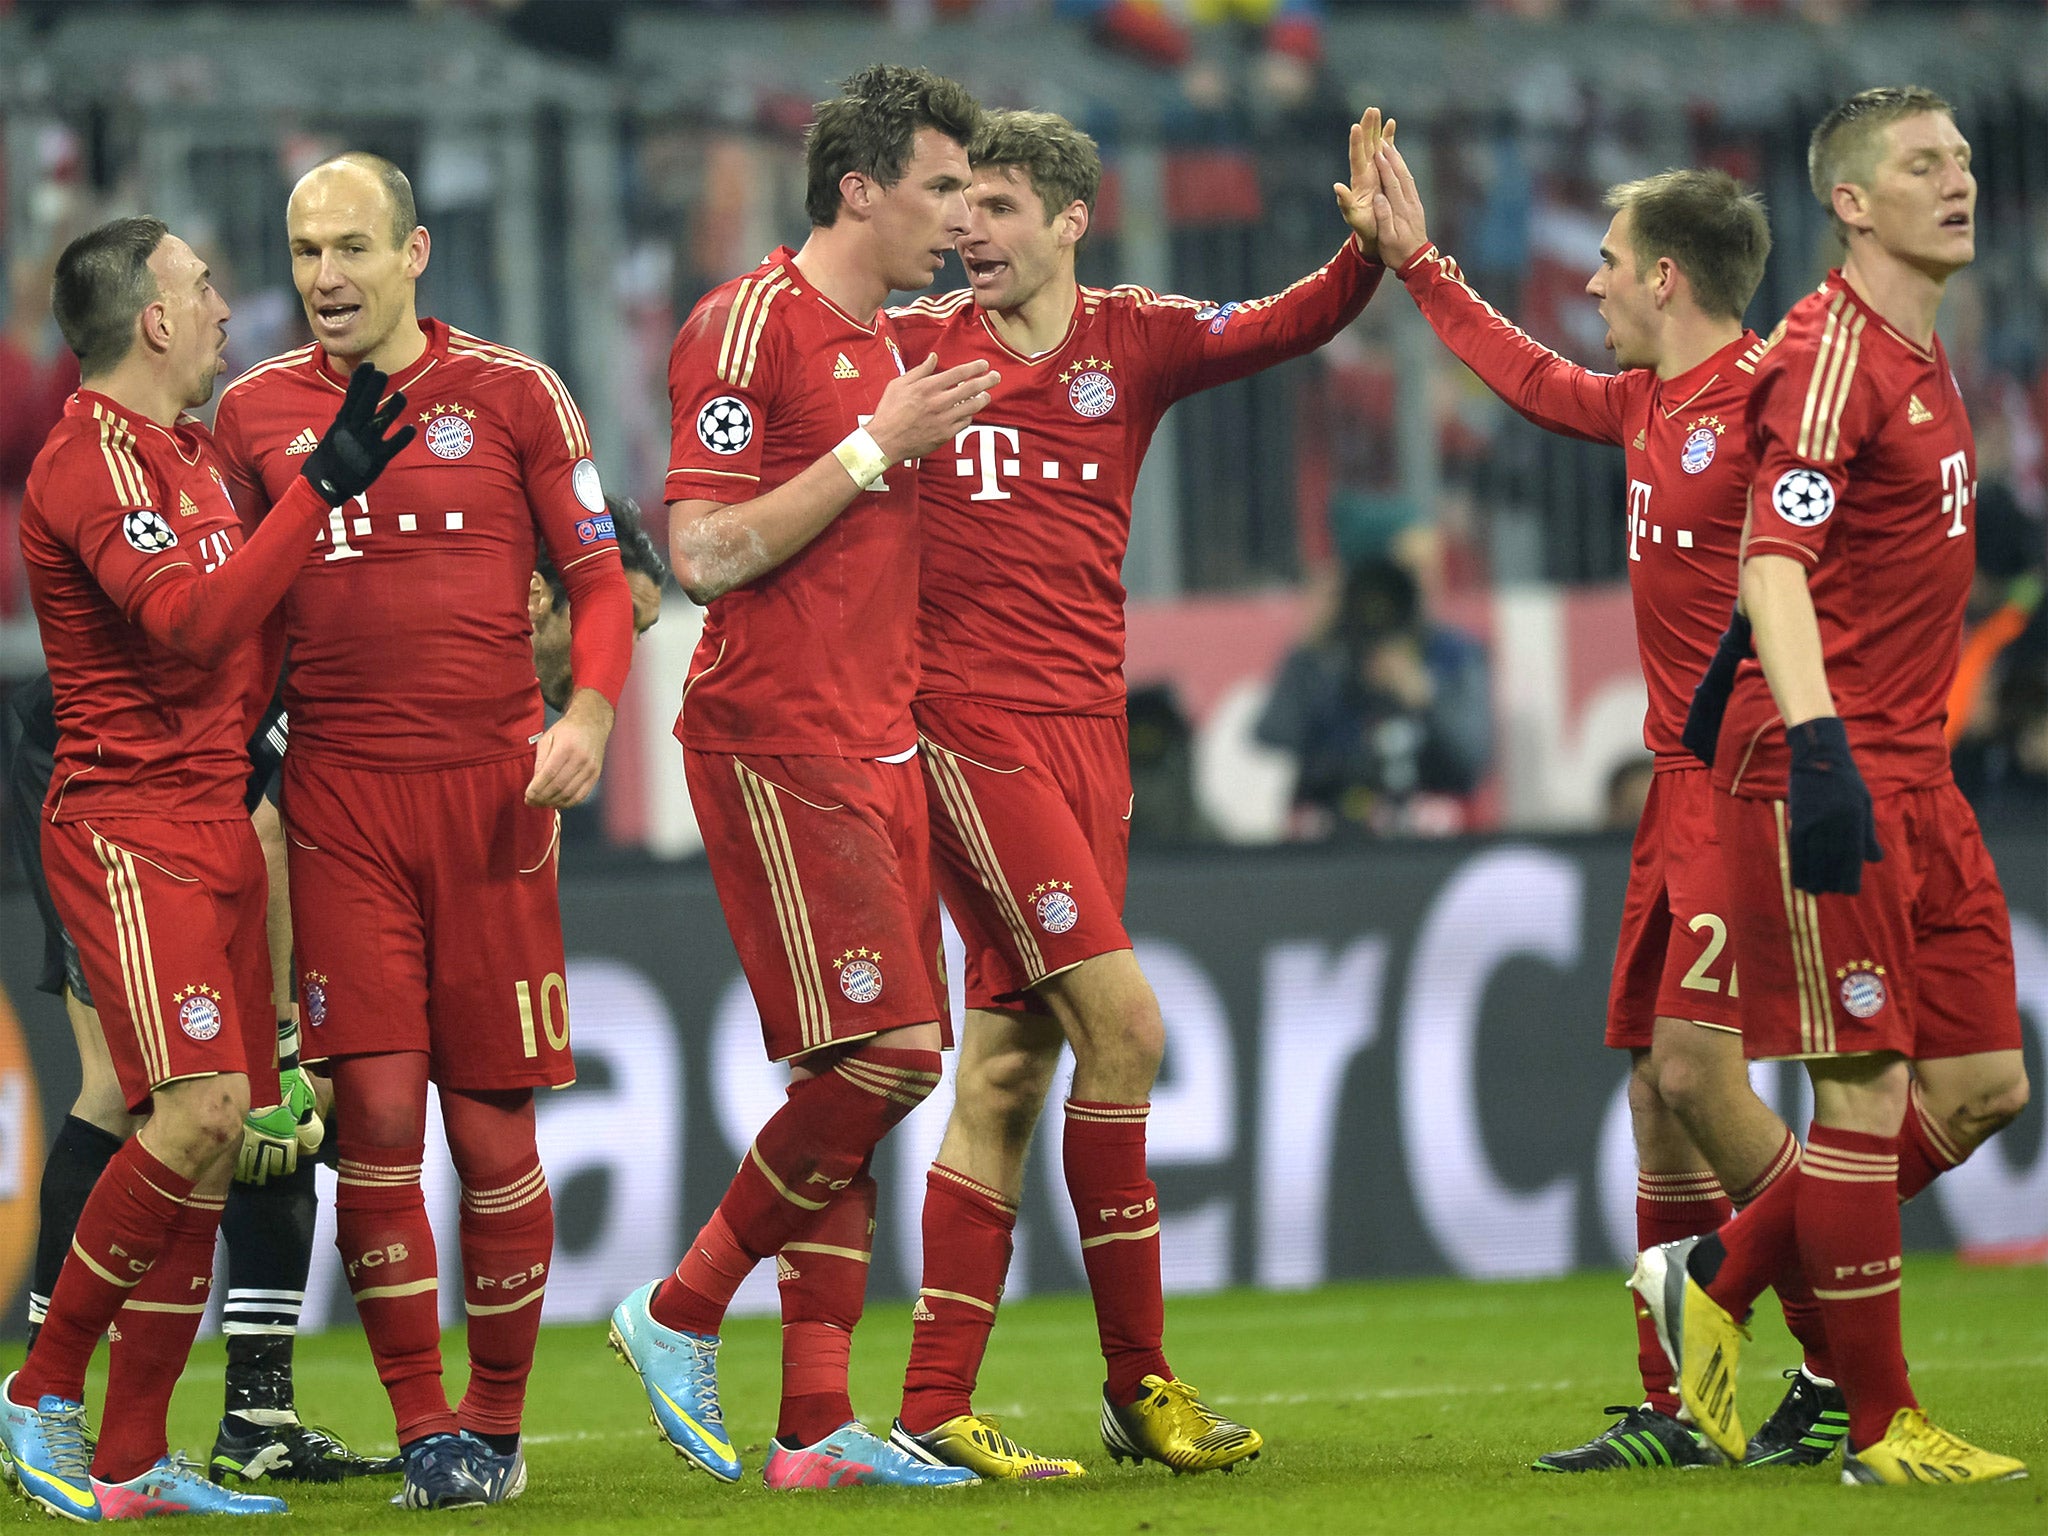 Bayern's football is both creative and relentless